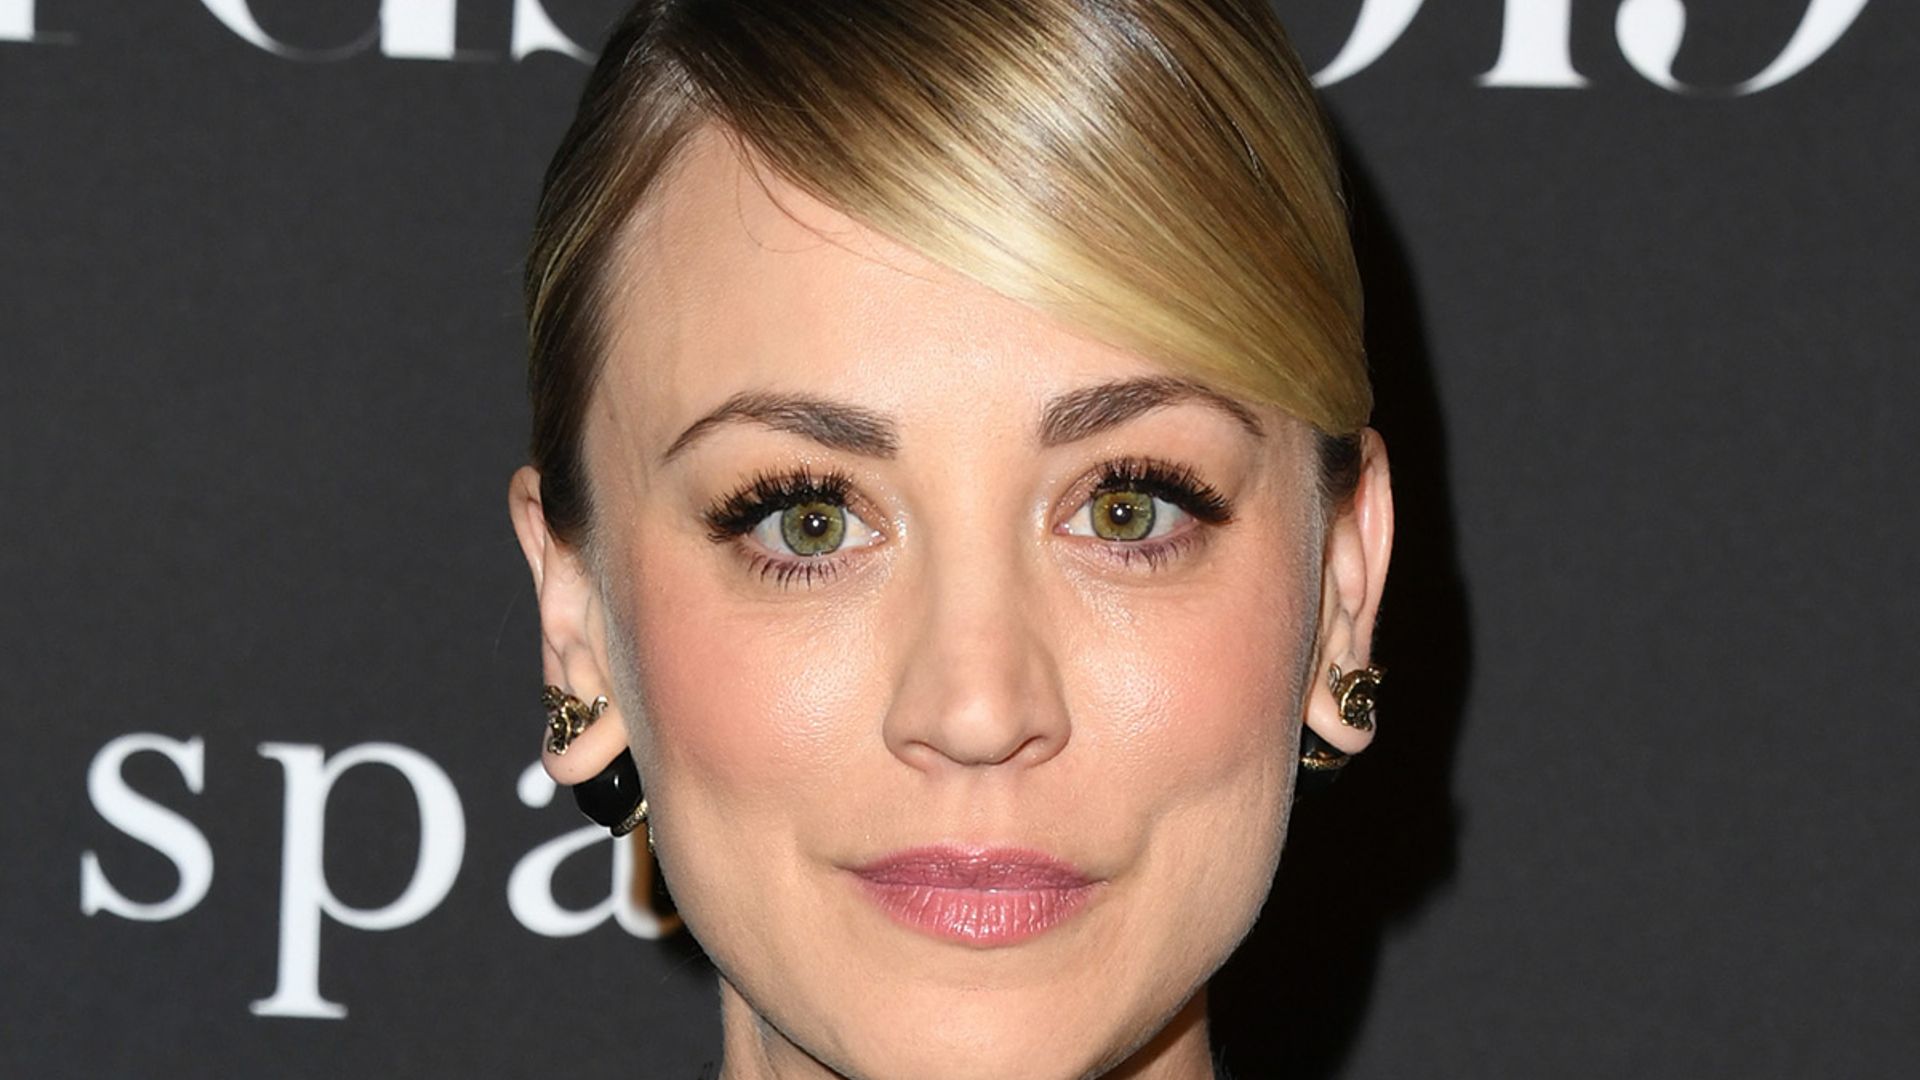 Kaley Cuoco left stunned by fan's incredible gift